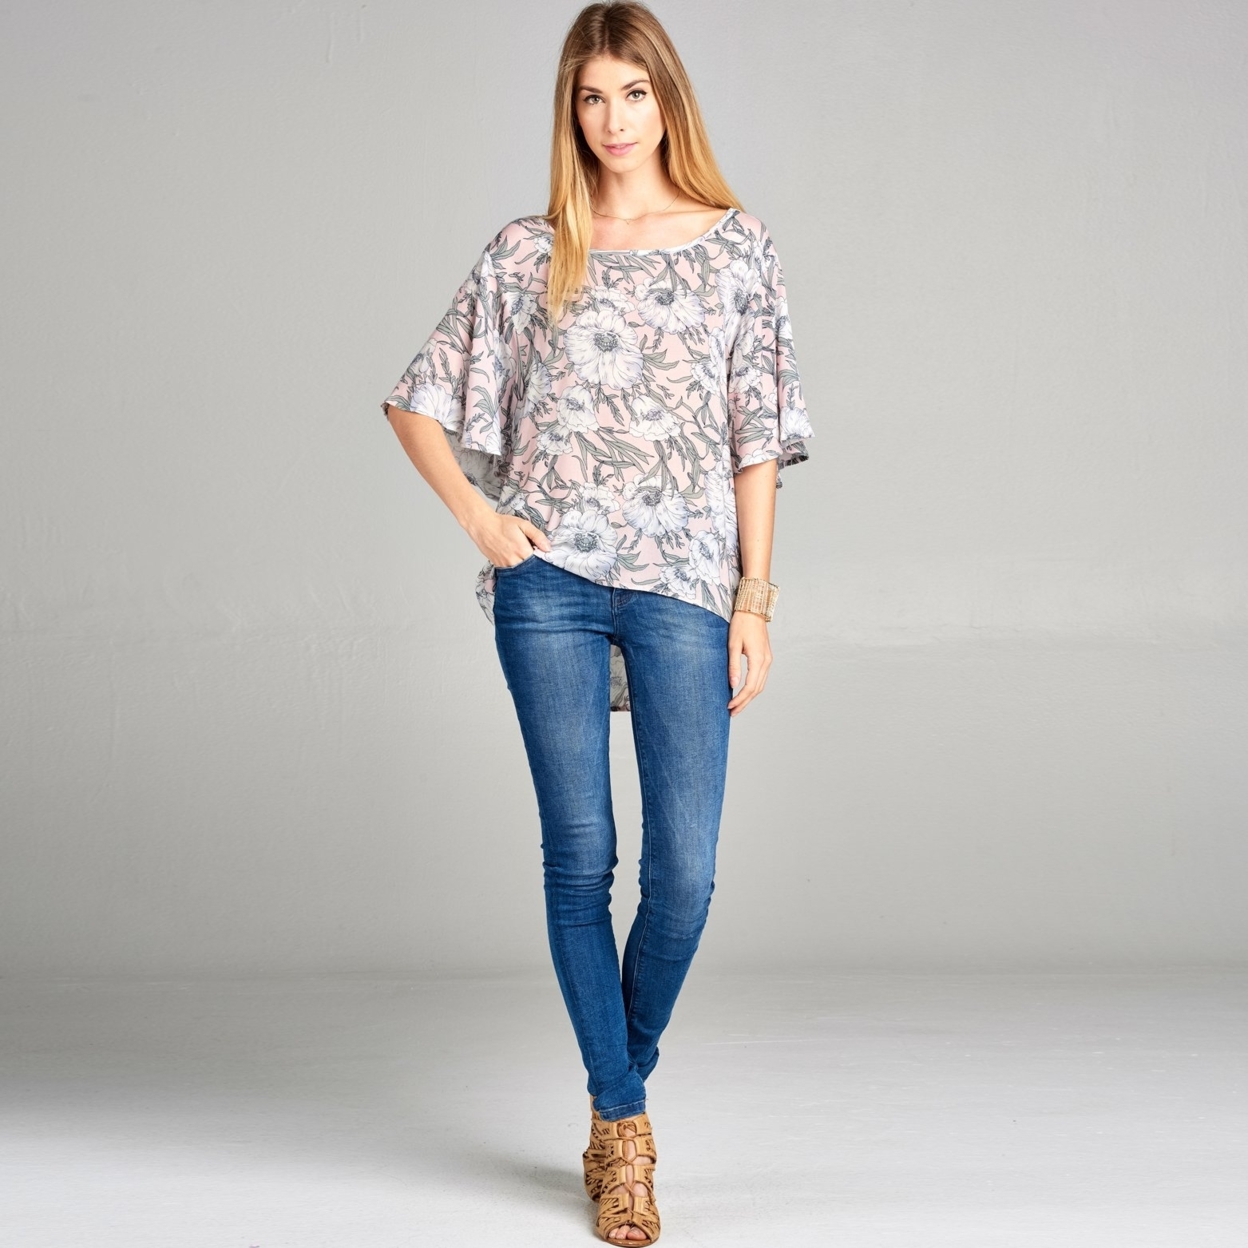 Butterfly Sleeve Floral Top - Warm Grey, Small (2-6)